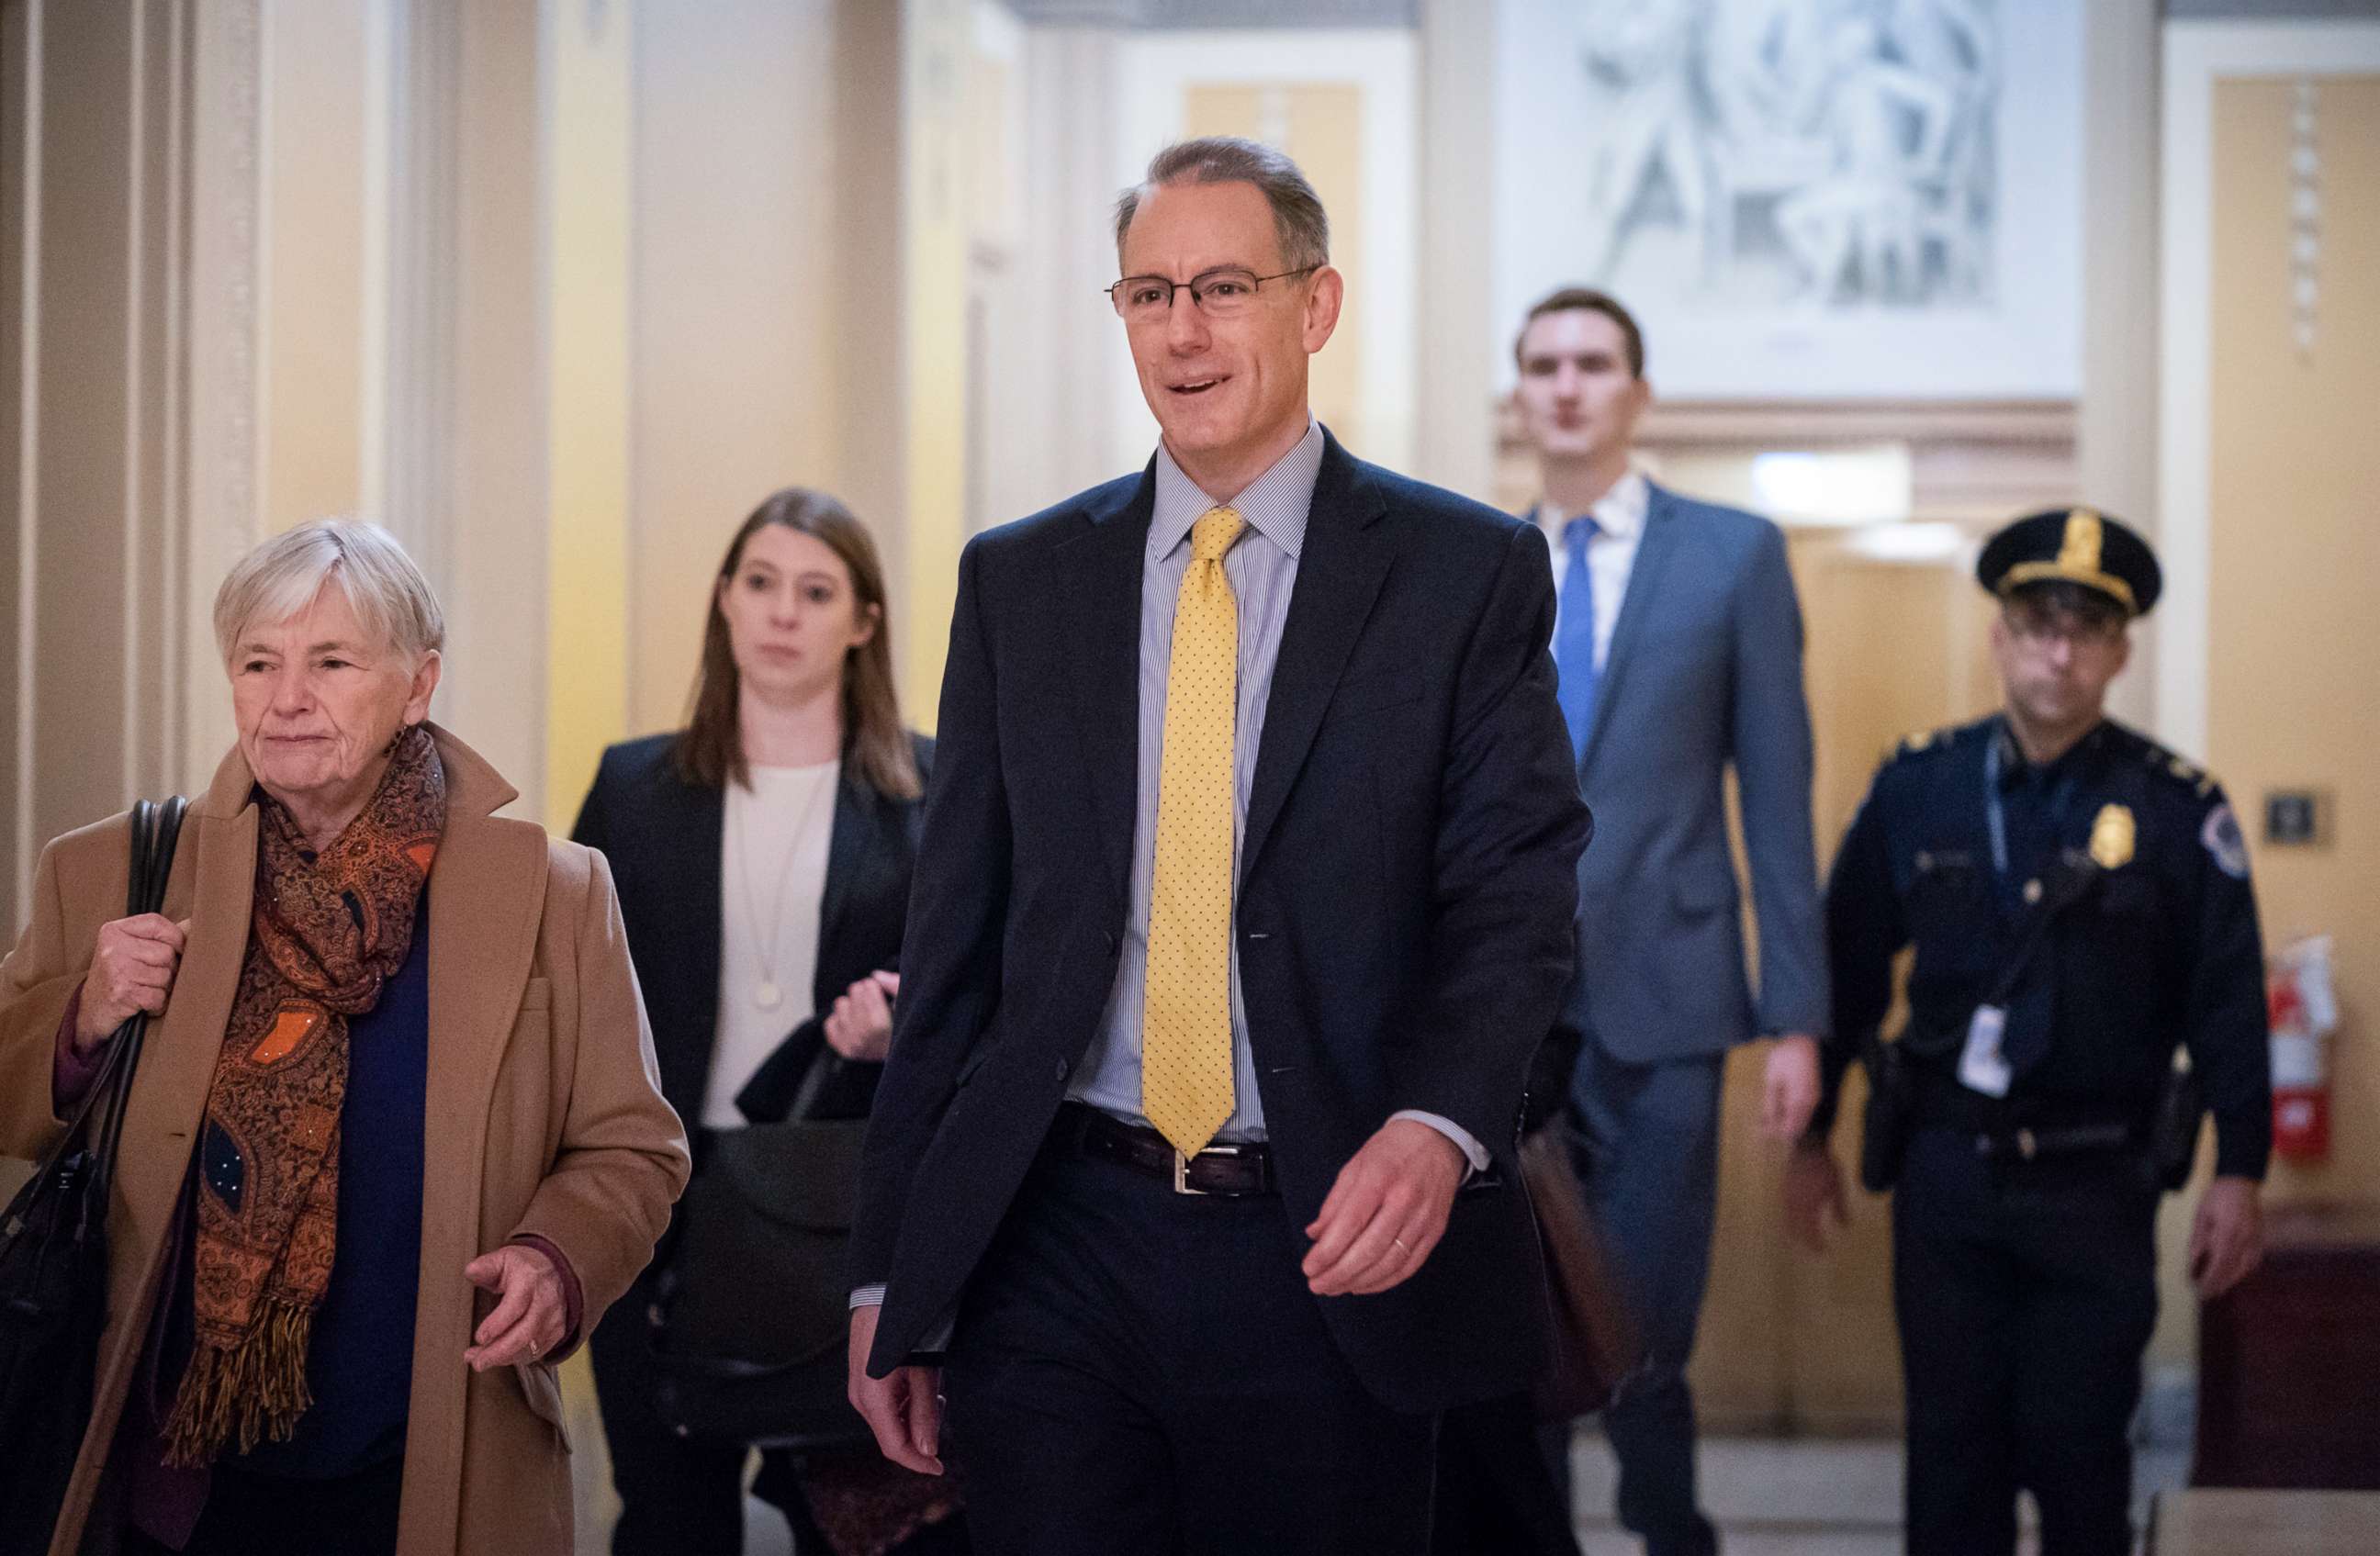 PHOTO: Mark Sandy, a career employee in the White House Office of Management and Budget, arrives at the Capitol to testify in the House Democrats' impeachment inquiry.